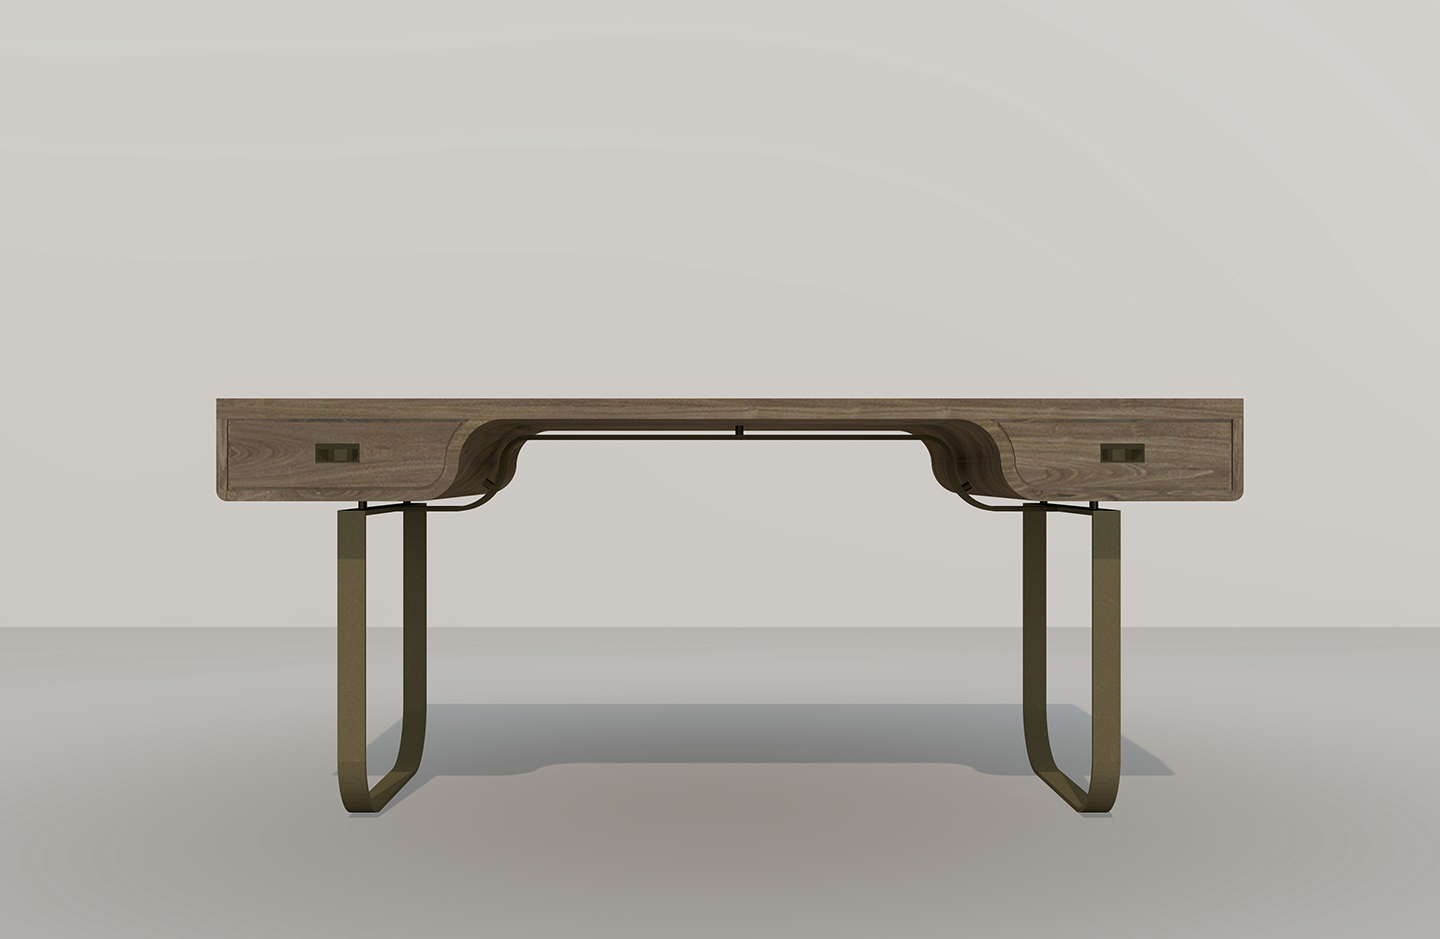 In production- bespoke desk from solid British hardwood & patinated metalwork